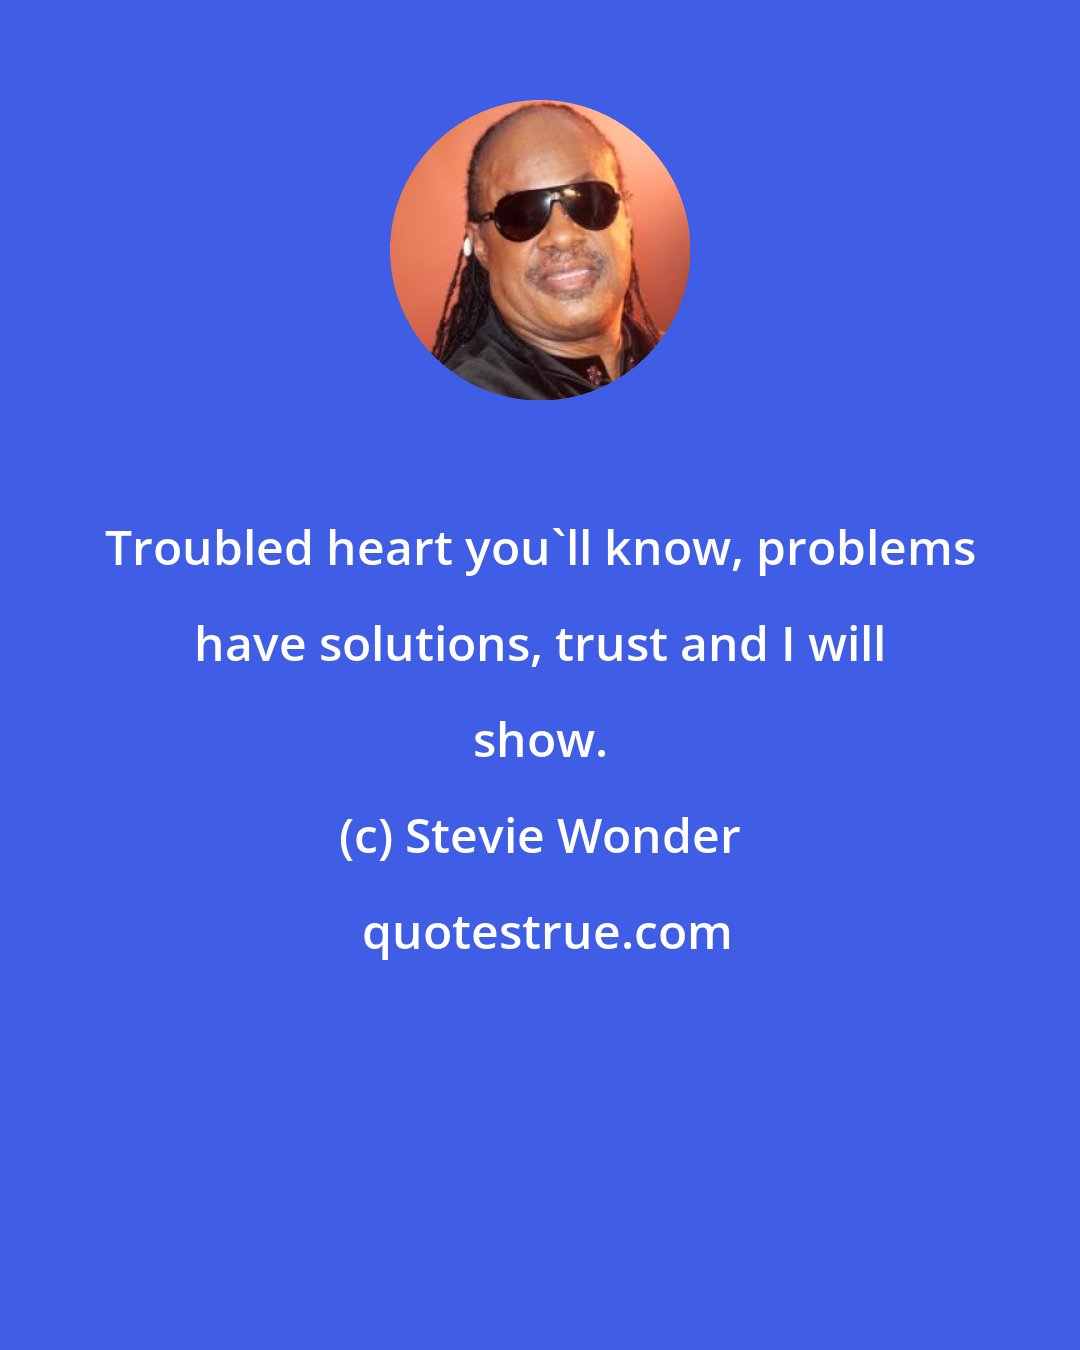 Stevie Wonder: Troubled heart you'll know, problems have solutions, trust and I will show.